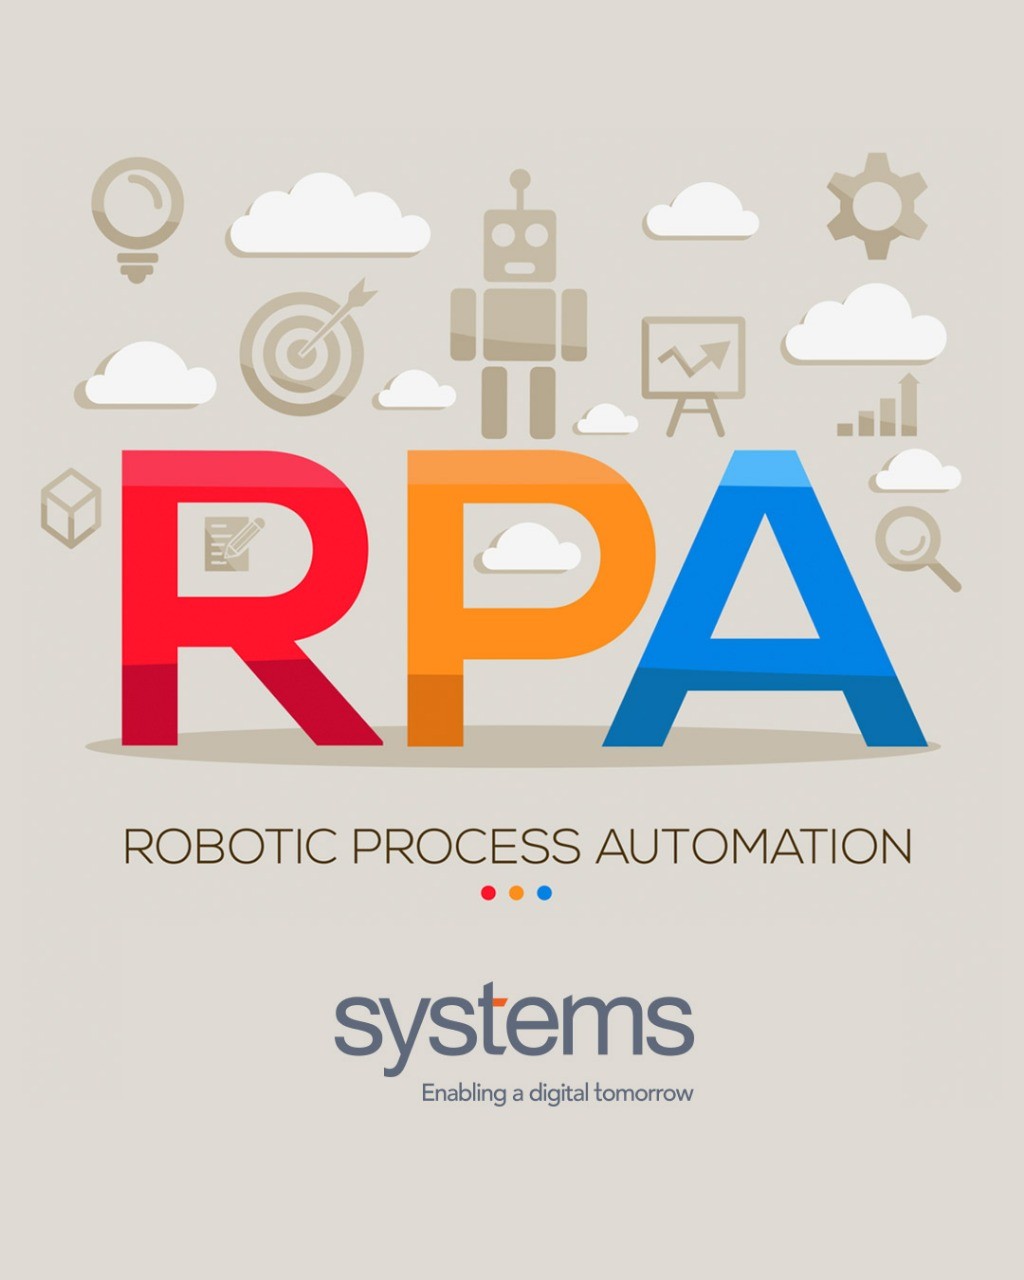 Robotic Process Automation is the most intuitive approach in automating business tasks and operations. Do you know 81% of Forbes Global 2000 companies have invested in RPA? However, unfortunately, only 50% have been successful in implementing it. It isn’t the technology’s fault, but of the ones who have been implementing it. If done right, businesses can scale their virtual workforce past 50 bots and multiply operational efficiency.  Only by keeping a few things in mind and making the right strategic decisions, you can implement RPA for your business. Here is how:  Prioritize your business processes  It is not a wise practice to automate all of your business processes and tasks. Before formulating a case for automation, it is incumbent upon organizations to be sure which processes and tasks are best automated. If you want optimum results, the first thing you need to do is identify which processes will yield the highest ROI. You can decide this based on the impact in review, the frequency of execution, the extent to which the human-level decision-making is required, and how they vary from industry-standard processes.  In simple terms, the RPA bots can easily perform simple, repetitive tasks. The processes that are not straightforward or require complex evaluation should not be the first ones to be automated. Hence, the rule is that for the initial stage, you keep it as simple as possible.  Find Your Tribe  Even when you have bots carrying out rules-based and repetitive tasks, you need your in-house expertise to streamline the process. The first step in getting your team together with you is to convince your management. Do not rush. Allow your management to understand the benefits of RPA as to how it will improve overall efficiency and increase ROI.  Your team might be reluctant towards RPA implementation, for there is a notion that automation replaces human jobs. Assure your people that it is going to benefit them in what they do and not replace their jobs. Convincing your organization might be taxing, but automation results in better customer experience, rapid ROI, cost reduction, increased compliance, scalability, and flexibility, etc. On average, bots complete tasks approximately 15x faster than manual effort.  Choose the right technology partner  Although no-code RPA solutions are relatively easy to implement, as they are less time-consuming. However, you might hit roadblocks that can potentially derail your RPA journey, resulting in unforeseen expenditure and intensive labor. Therefore, it is essential to choose the right implementation or technology partner.  With the right implementation or technology partner, an expert in assessing, automating, and managing business processes, you can easily identify the best RPA solutions as per your requirement, leading to improved accuracy and efficiency. Systems Limited, Pakistan’s global technology leader, possesses the comprehensive technological expertise from strategy definition, RPA infrastructure, chatbot integration, execution, monitoring & scaling, to custom automation. It has enabled enterprises to redefine how they carry out a wide range of operations.  With the right technology partner and approach, you can empower your workforce and multiply operational efficiency to deliver unparalleled value and competitive advantage.